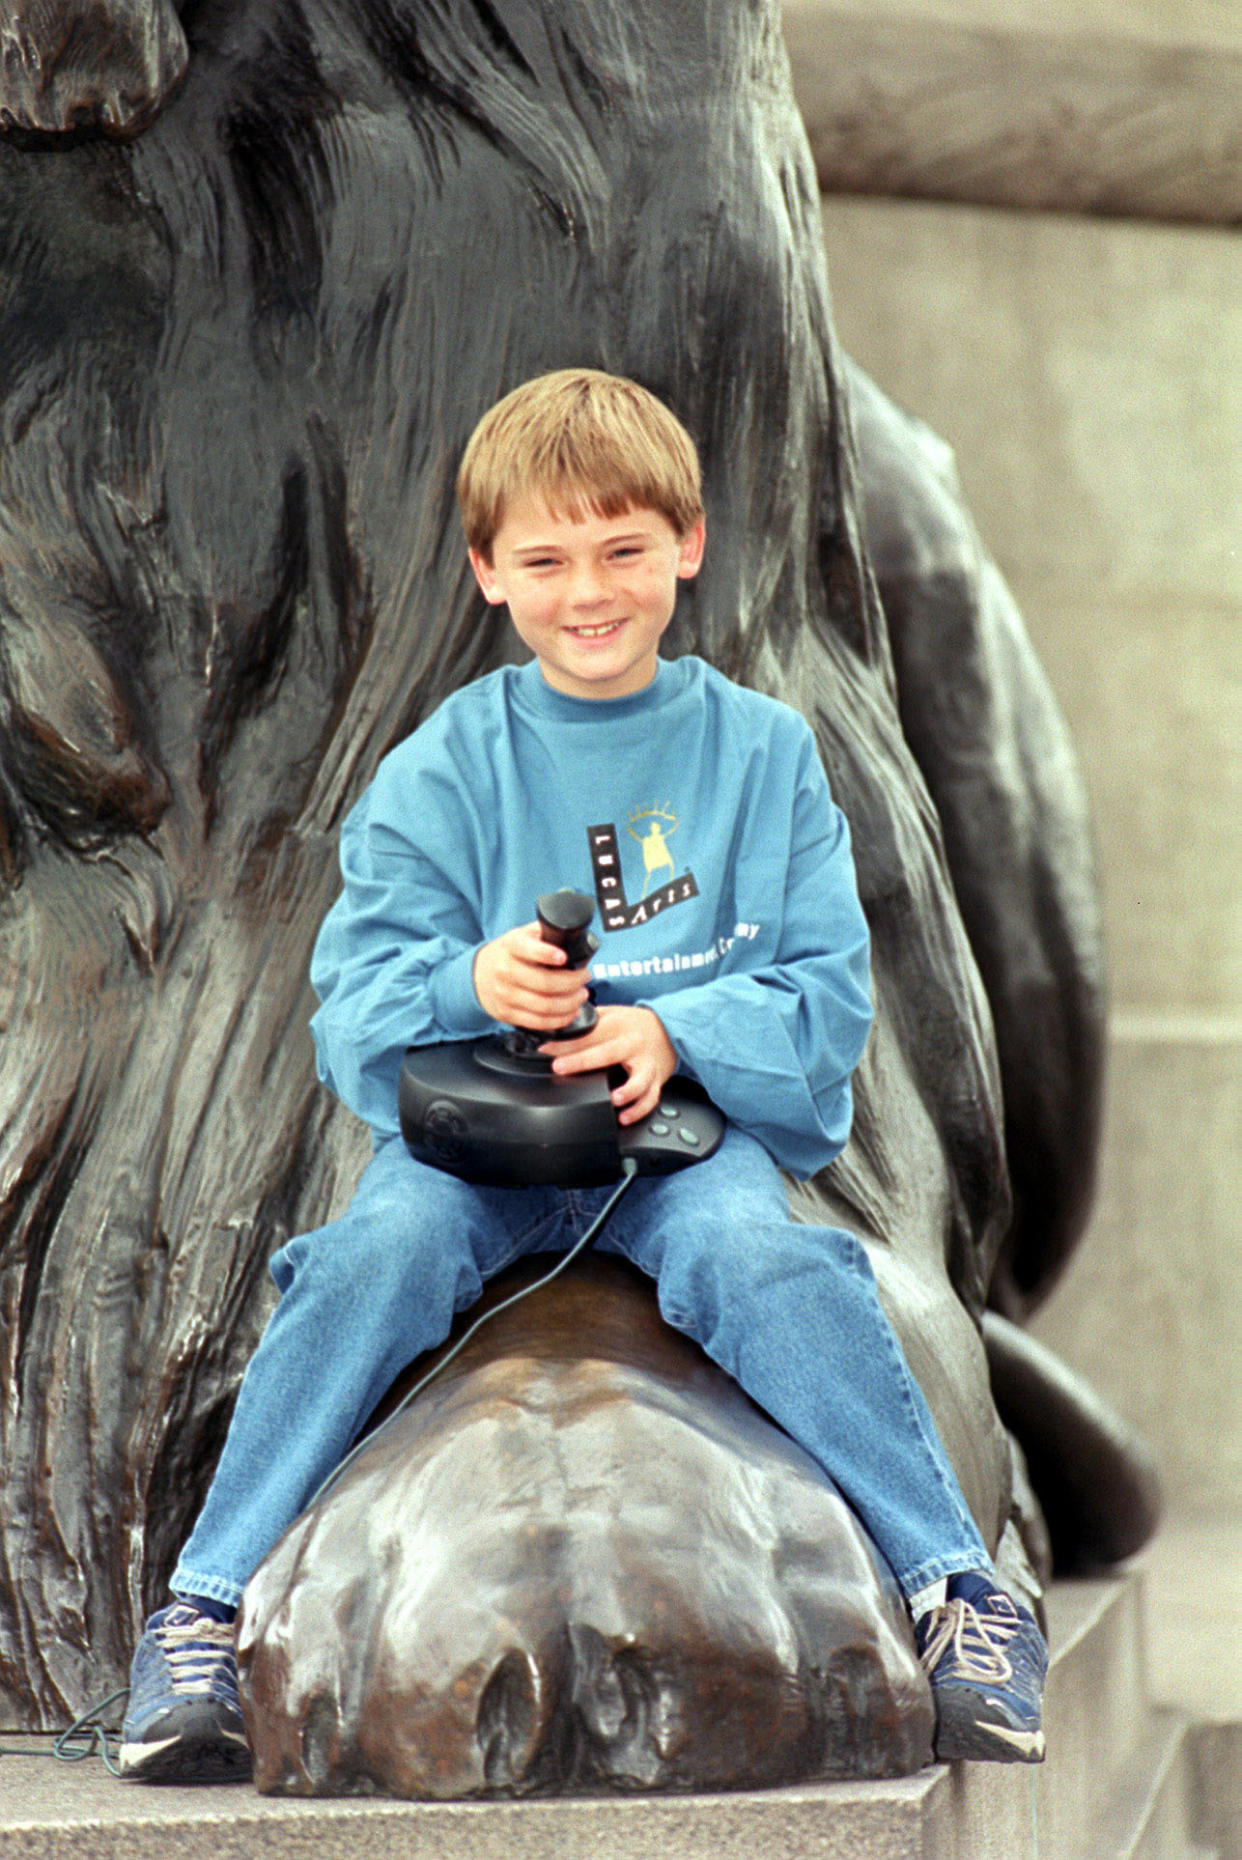 Young actor Jake Lloyd, who plays Anakin Skywalker (who grows up to be Darth Vader) in Star Wars Episode 1: The Phantom Menace, at a photocall in Trafalgar Square, London, to promote the Star Wars video games and film.